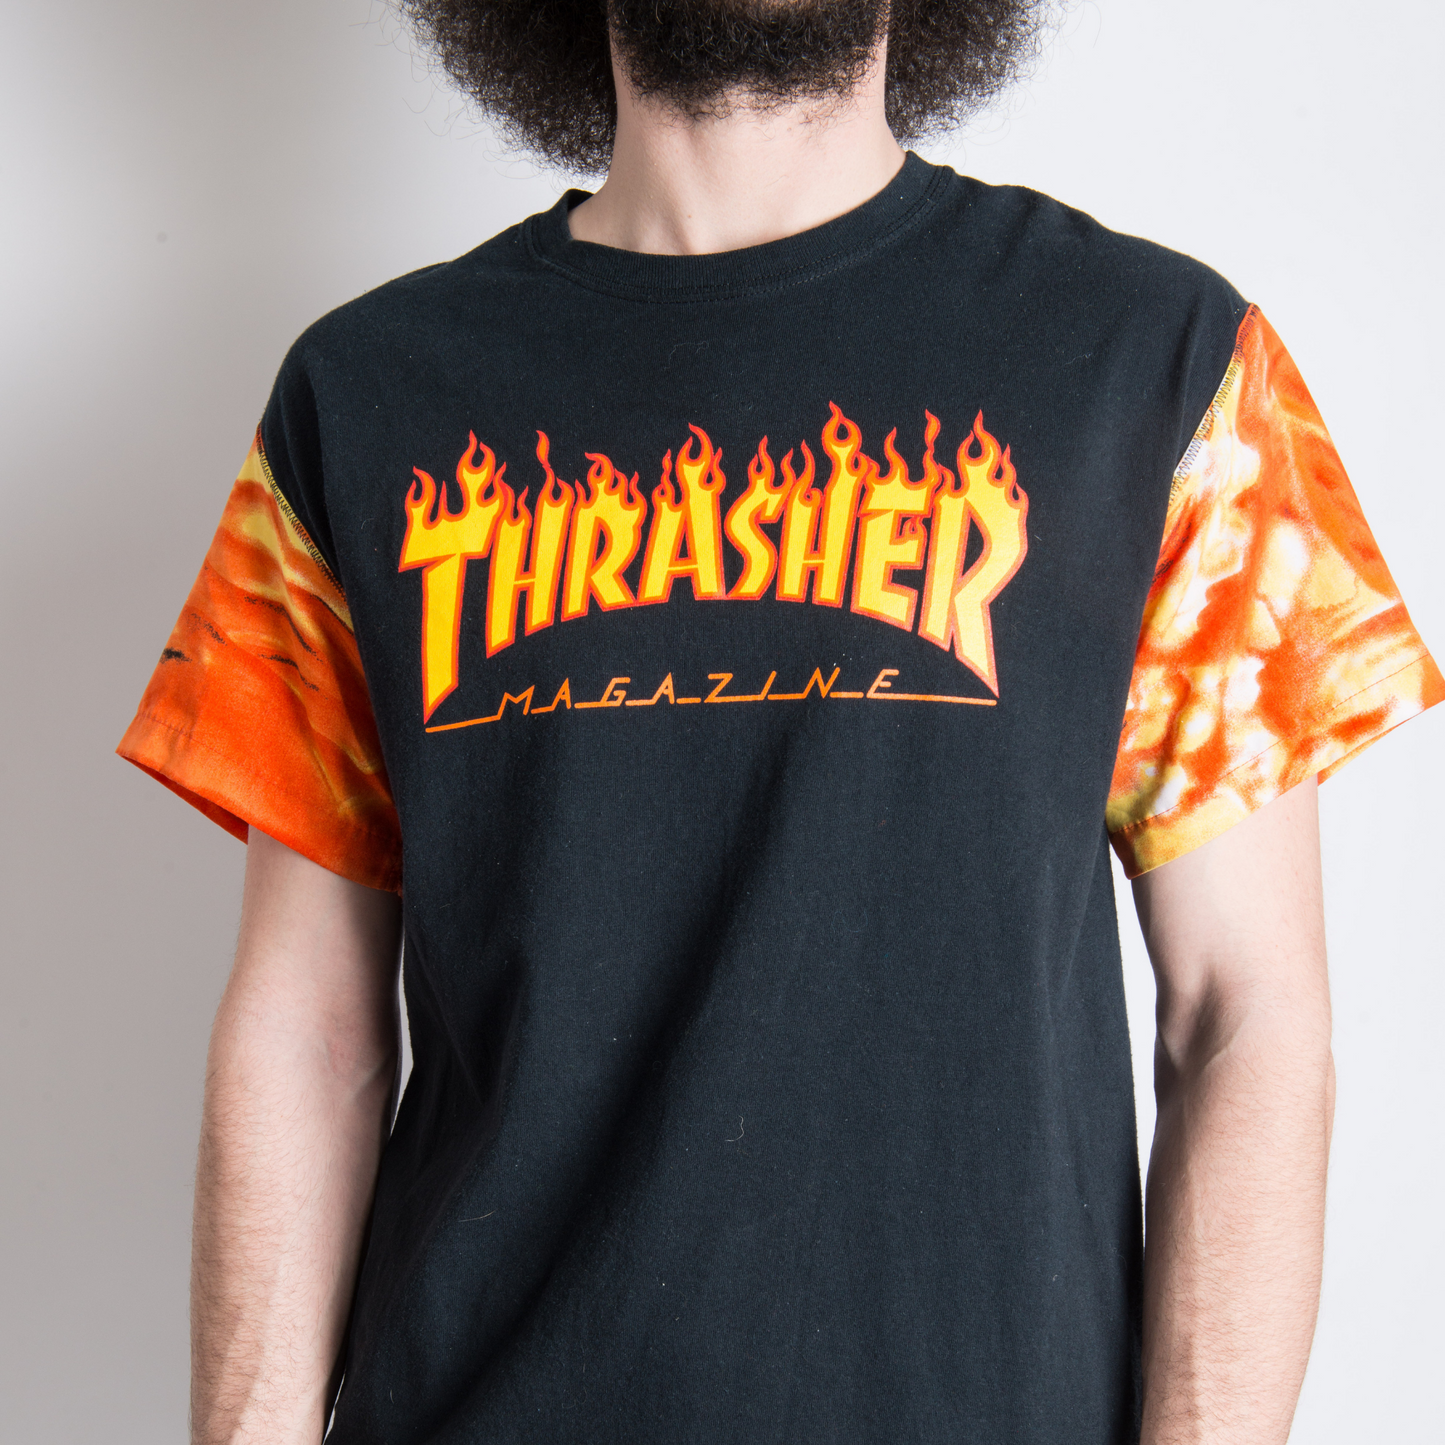 Black "THRASHER" T-SHIRT REVAMPED WITH VINTAGE SLEEVES. Alterations available.